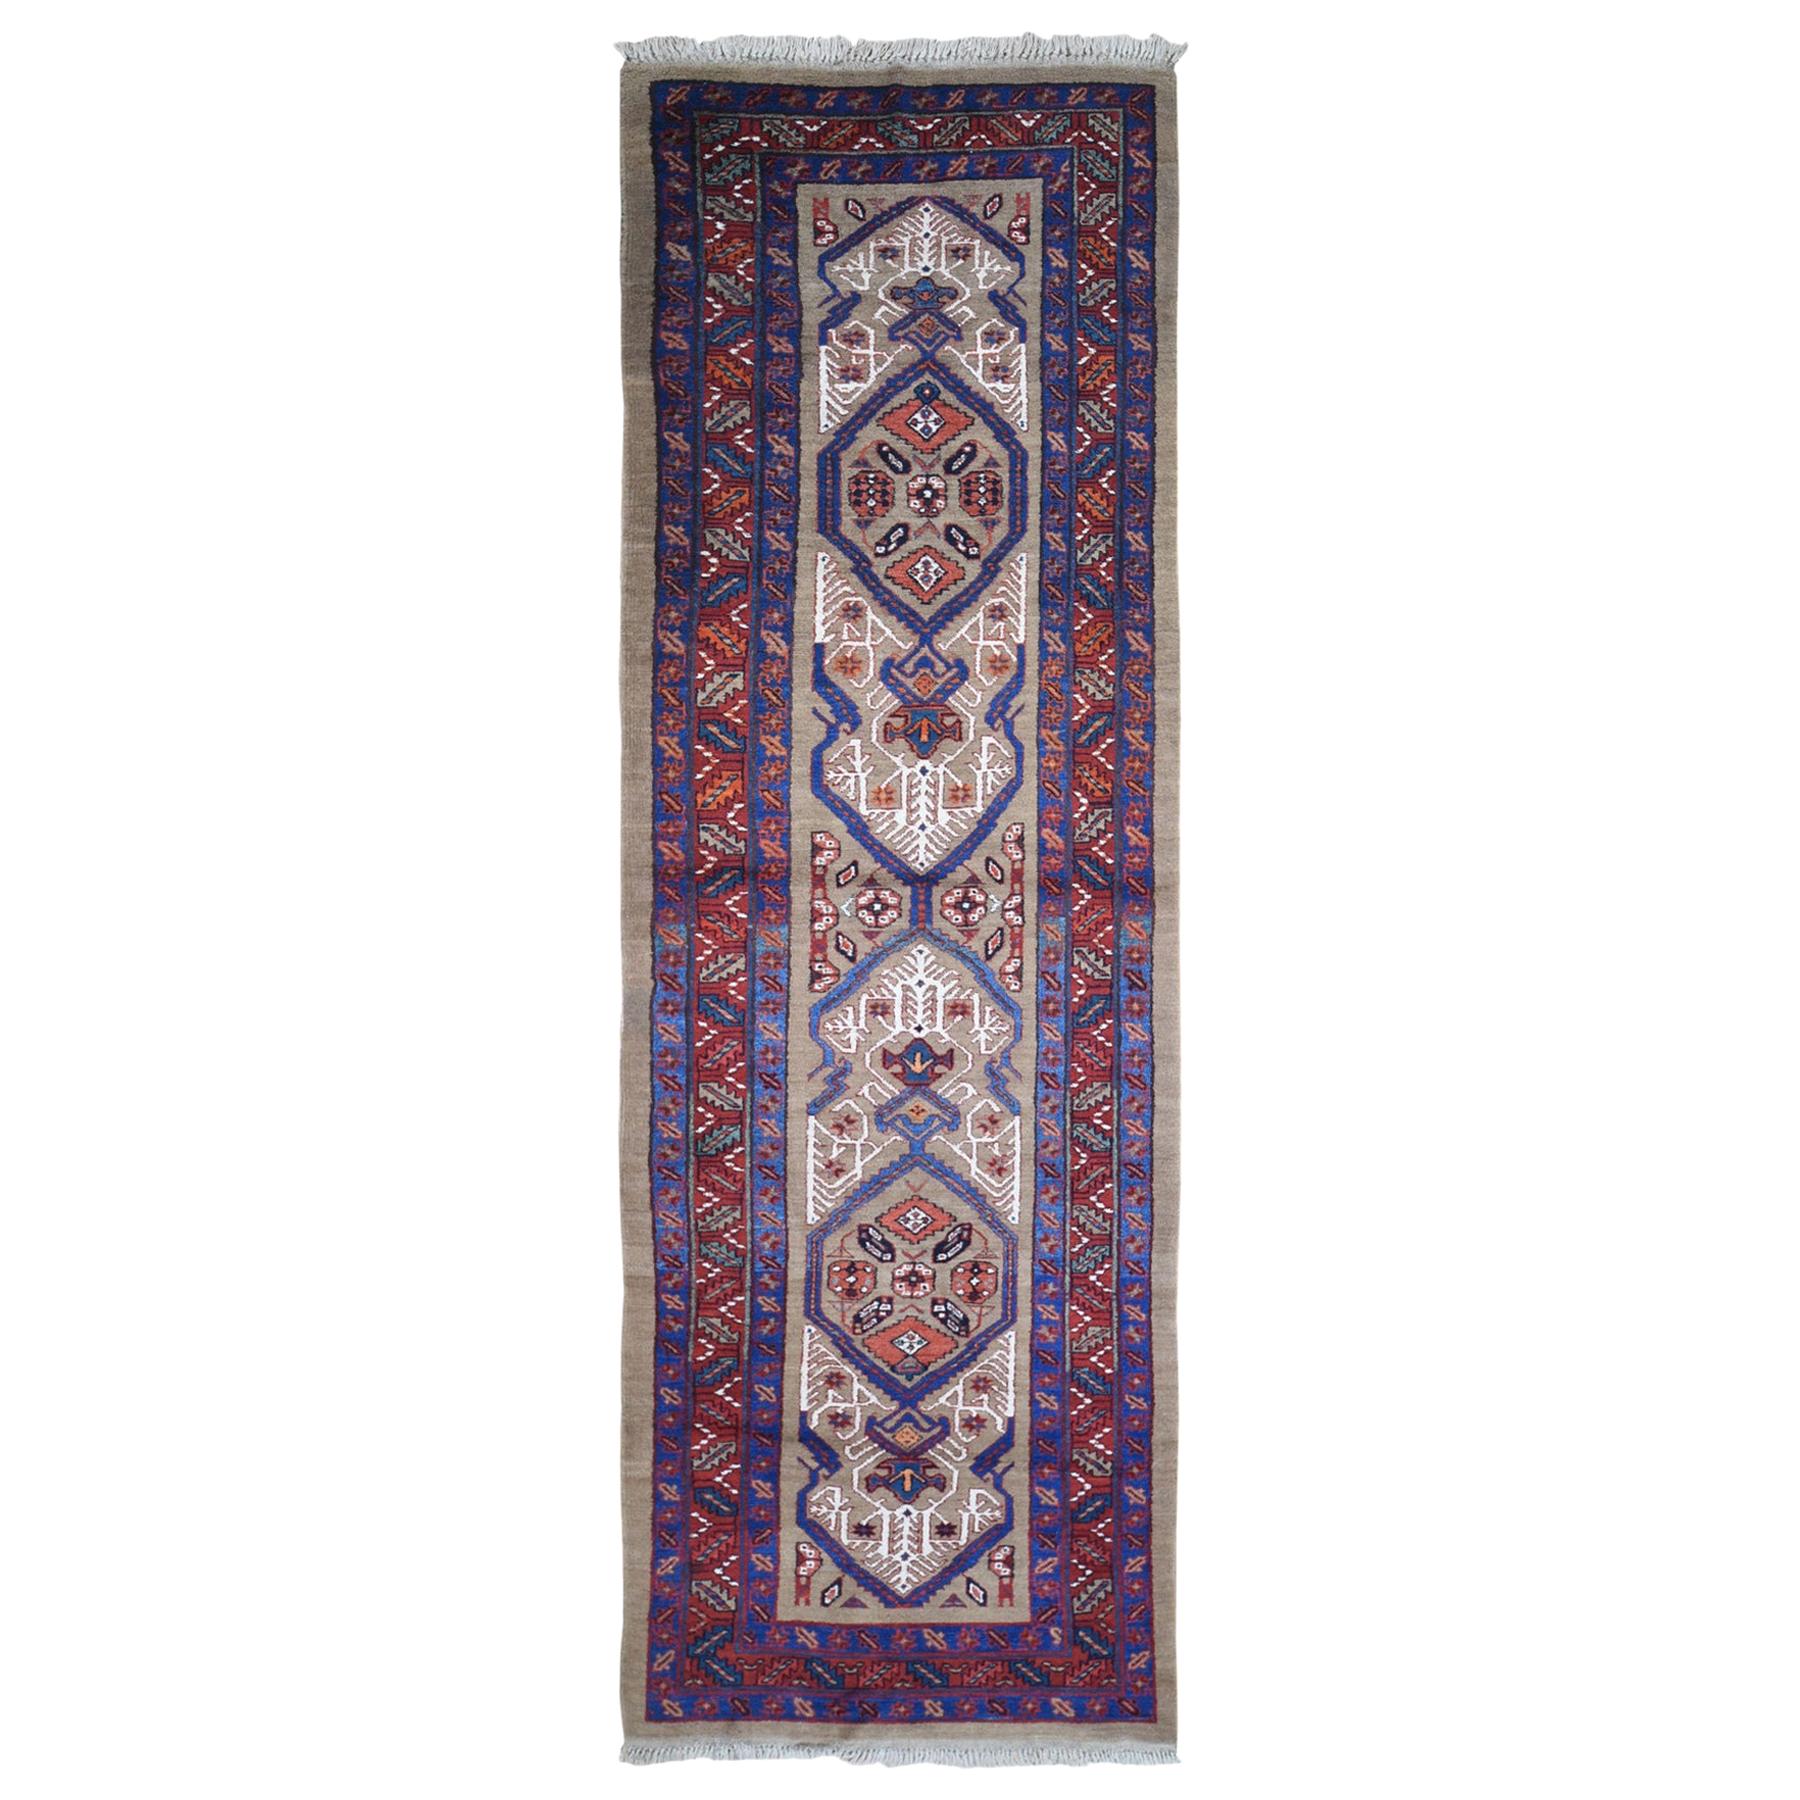 Antique Persian Serab Camel Hair Galley Geometric Patter Wool Handknotted Rug For Sale